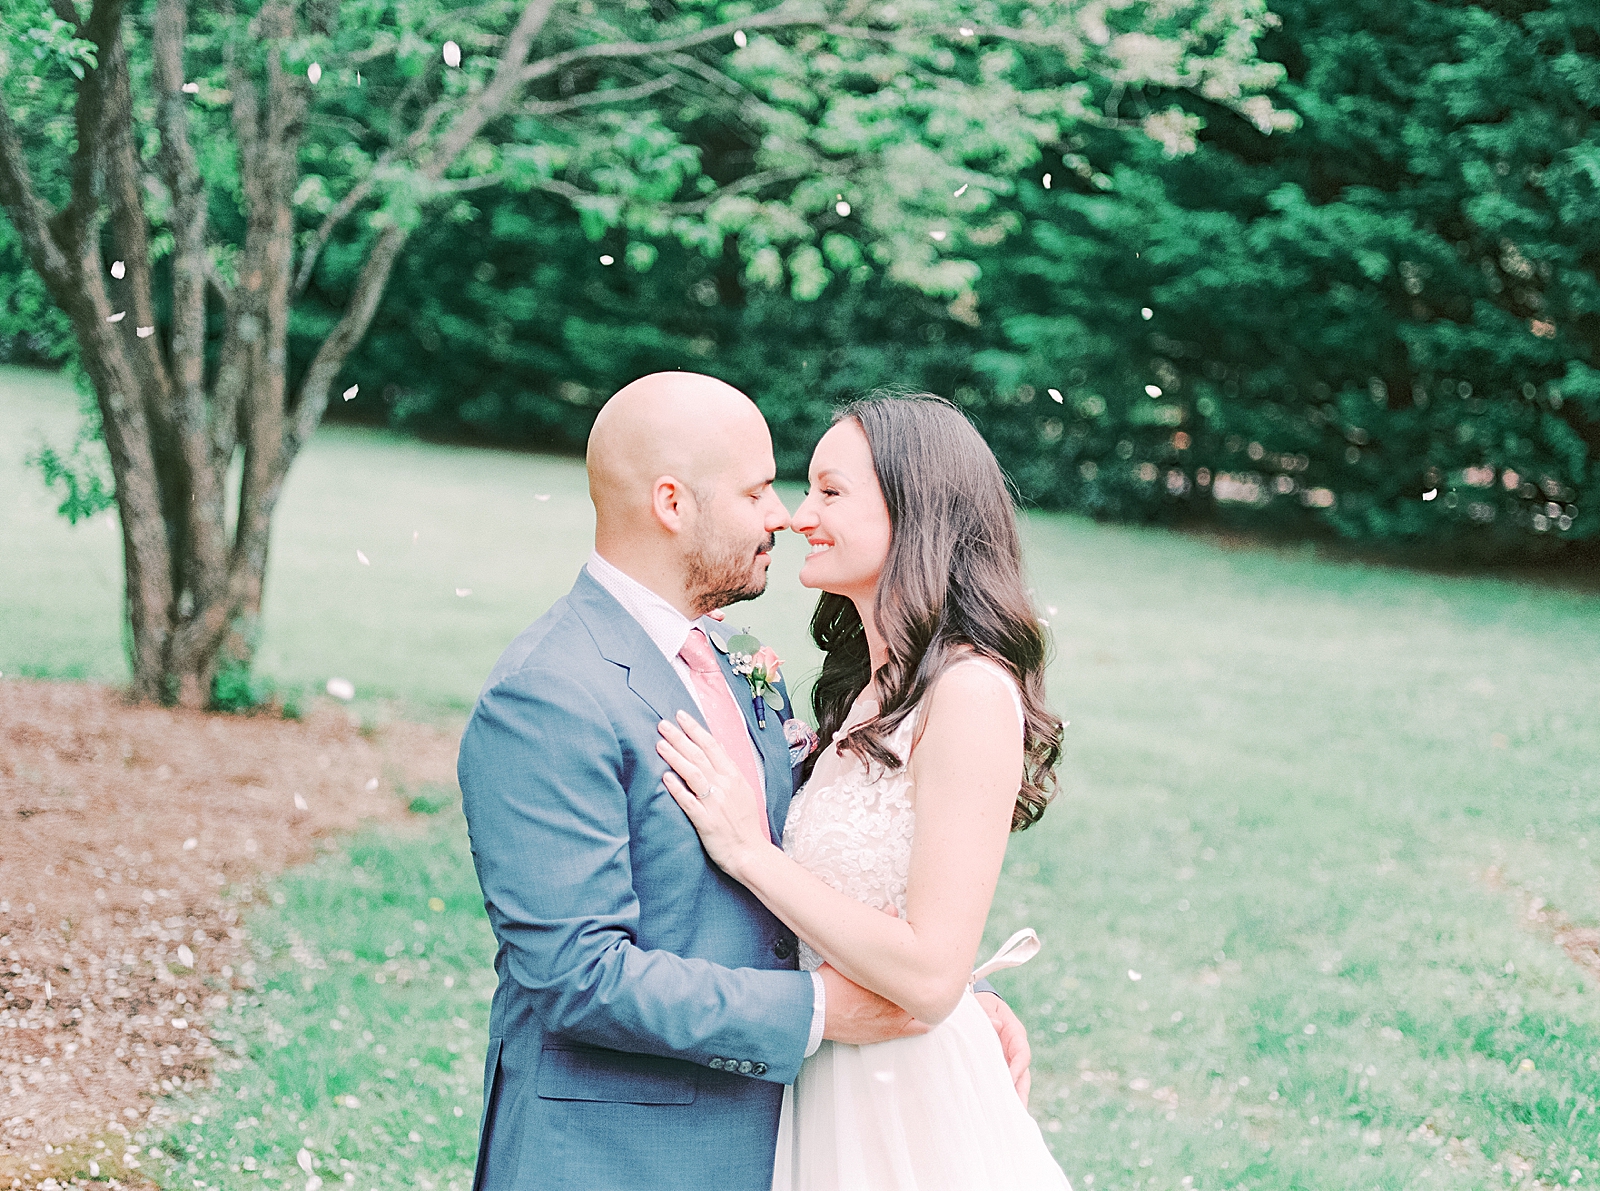 Spring Hawkesdene Wedding Bride and Groom nose to nose under tree with petals falling Photo